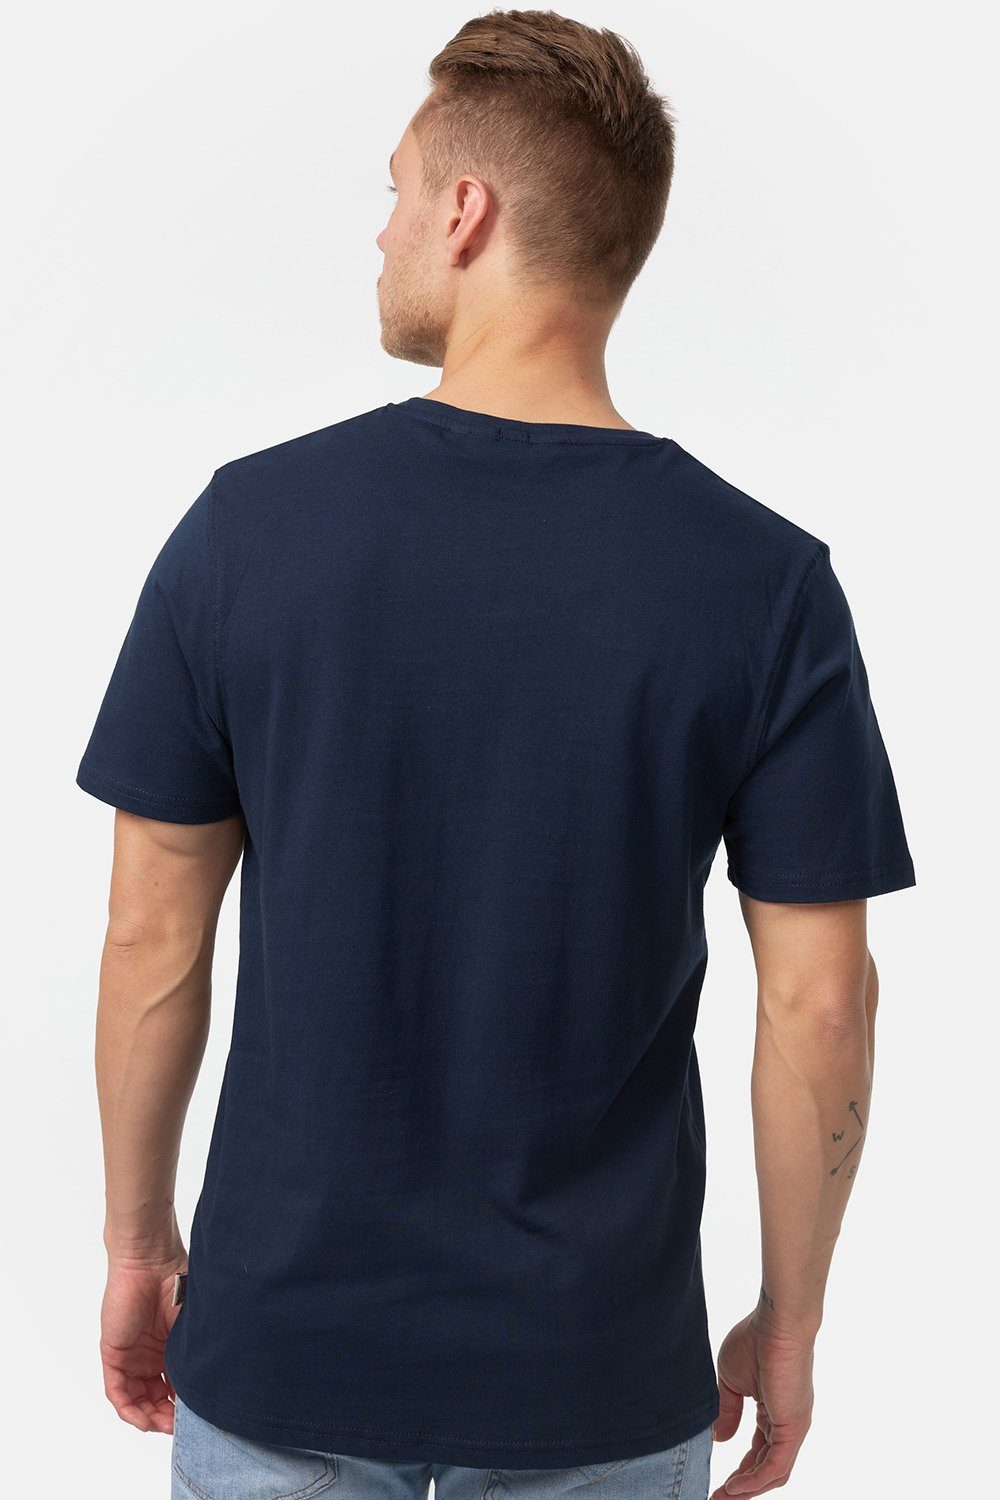 Lonsdale T-Shirt CLASSIC Navy